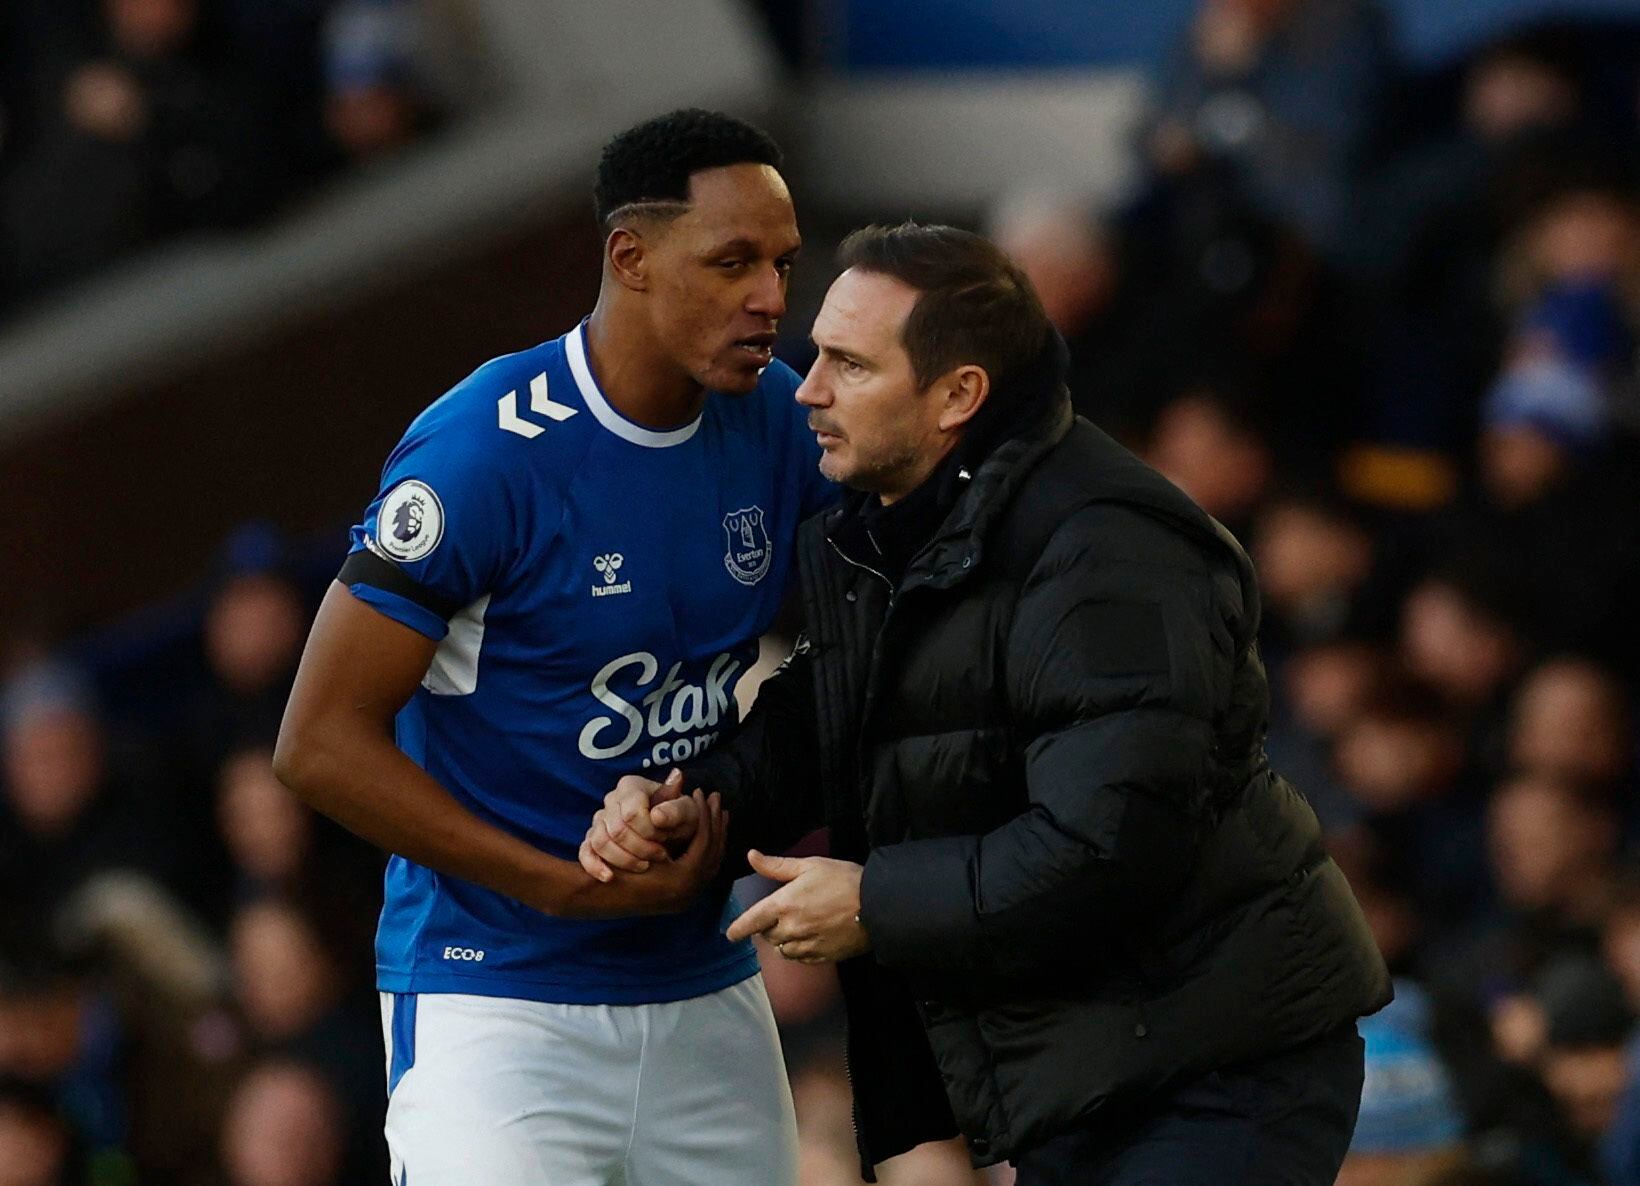 Por todas las competiciones Yerry Mina ha disputado en la presente temporada con el Everton tres partidos marcando un gol. Reuters/Jason Cairnduff EDITORIAL USE ONLY. No use with unauthorized audio, video, data, fixture lists, club/league logos or 'live' services. Online in-match use limited to 75 images, no video emulation. No use in betting, games or single club /league/player publications.  Please contact your account representative for further details.